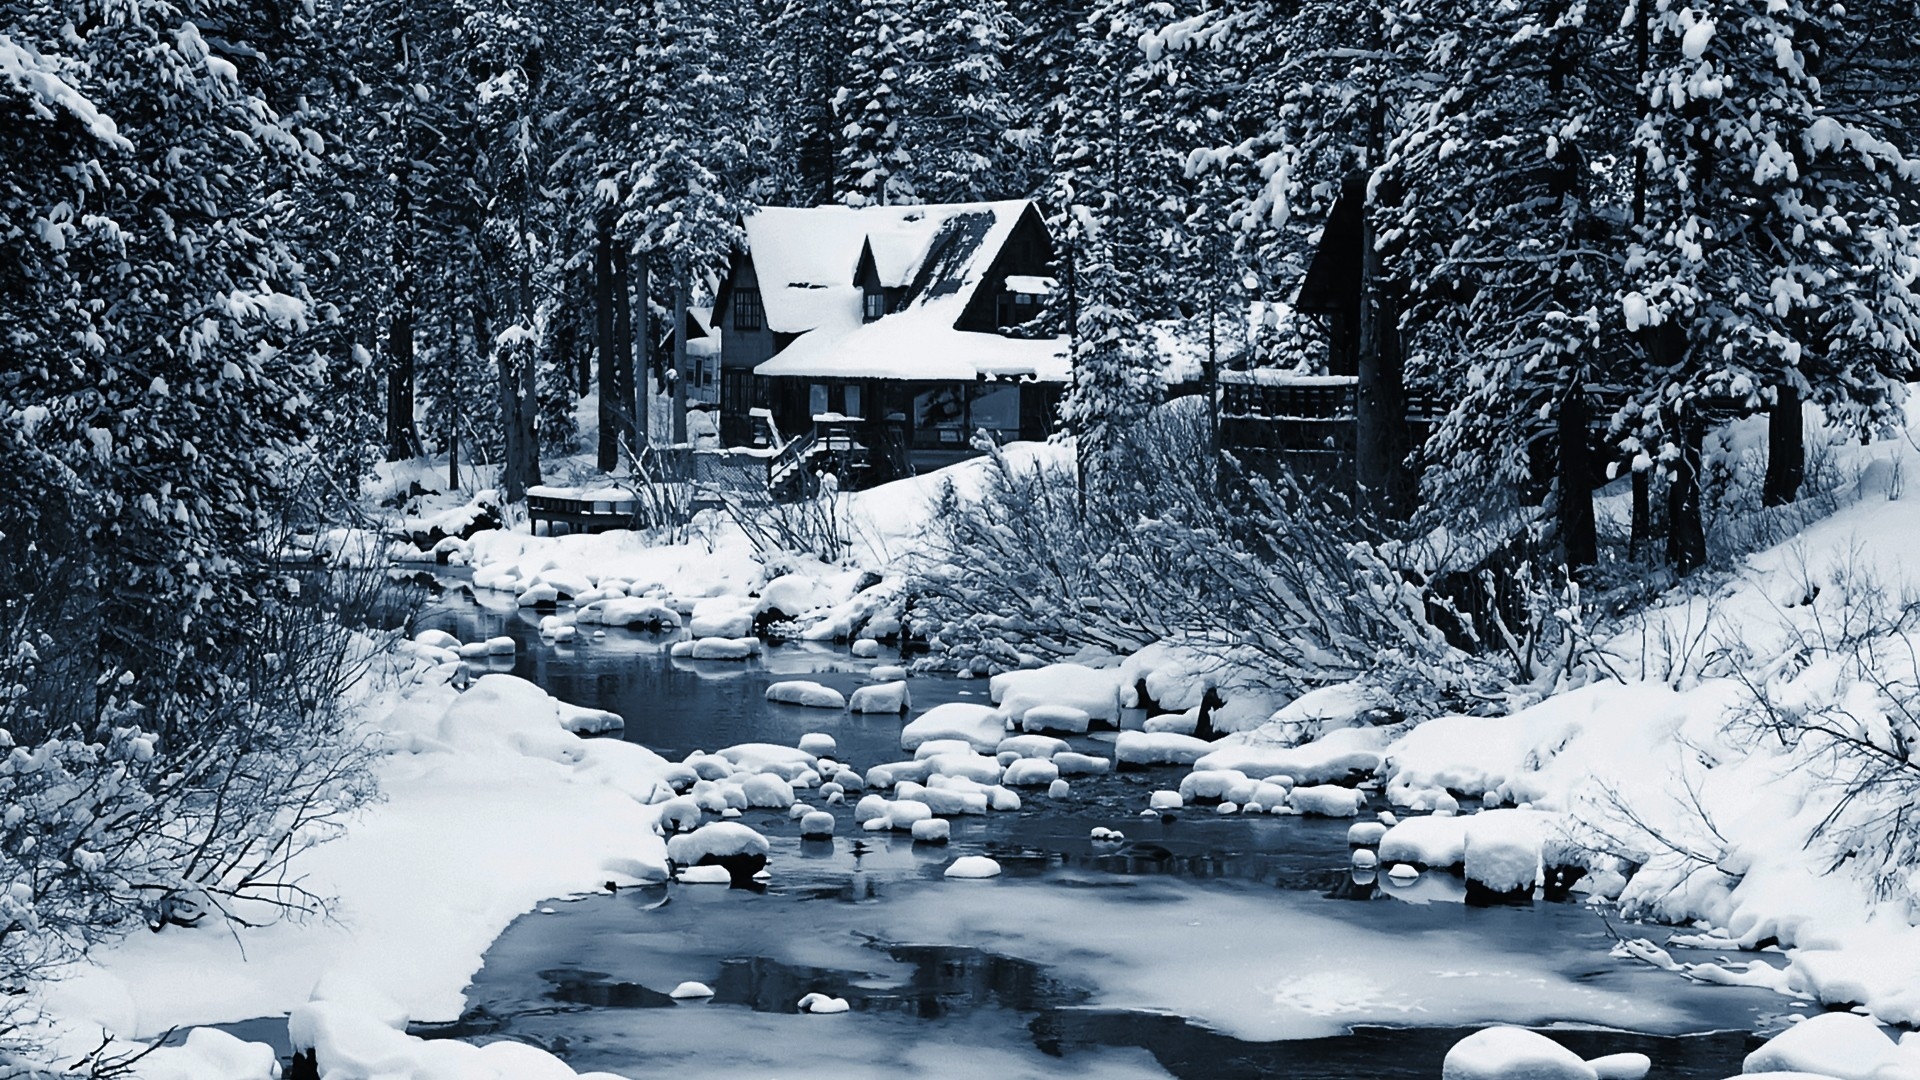 nature, Landscapes, Winter, Snow, Seasons, Rivers, Stream, Rocks, Trees, Forest, Architecture, Buildings, House, White, Contrast Wallpaper HD / Desktop and Mobile Background